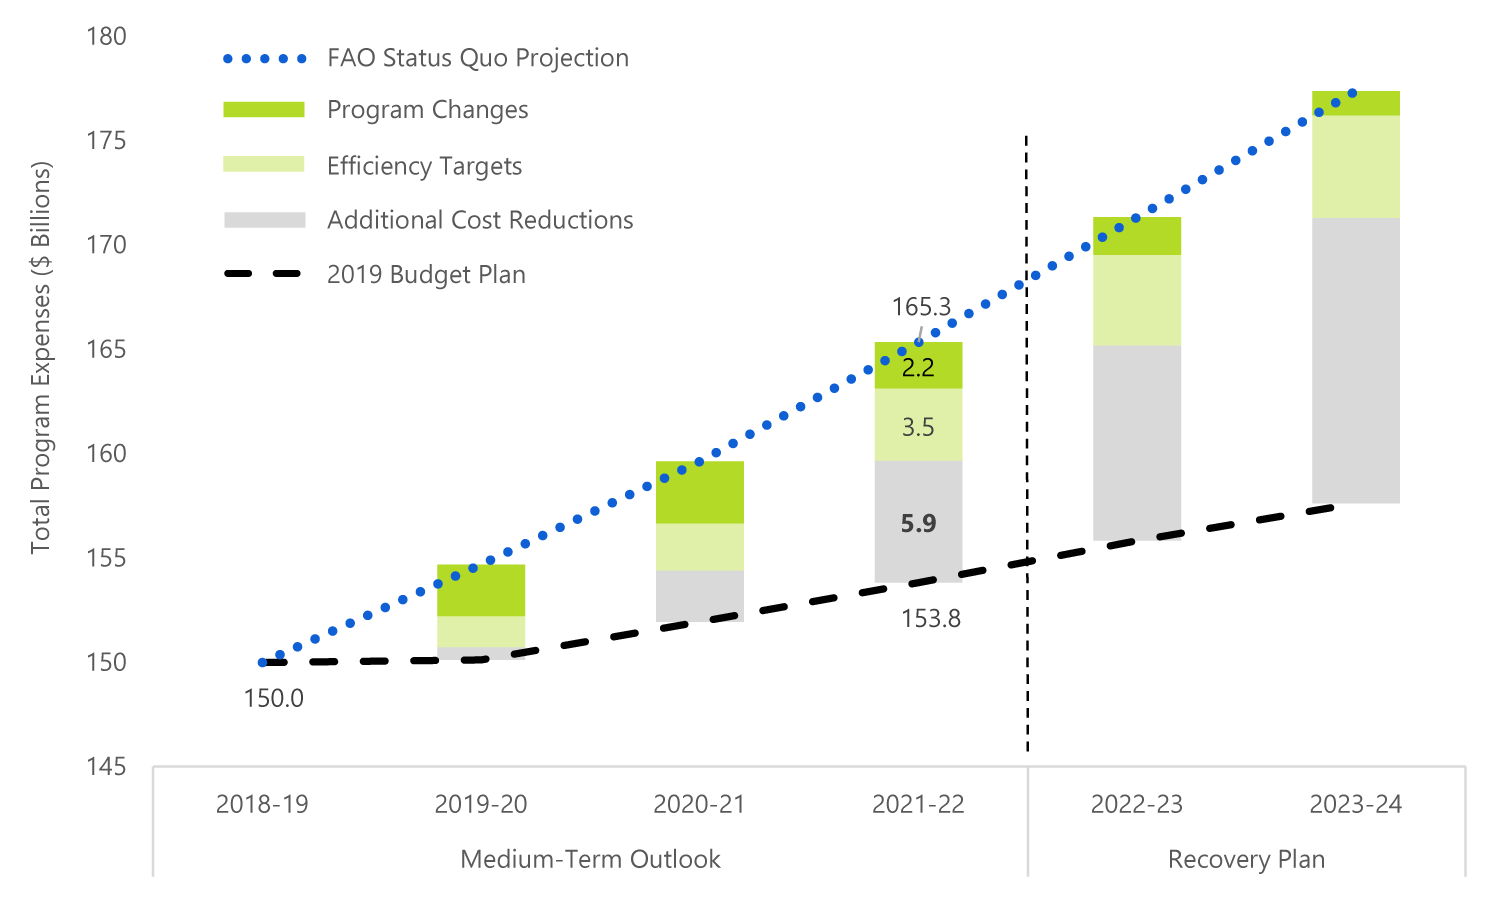 By 2021-22, program changes and efficiency targets in the 2019 budget will account for about half of the total cost reductions required to achieve the government's projected cost savings